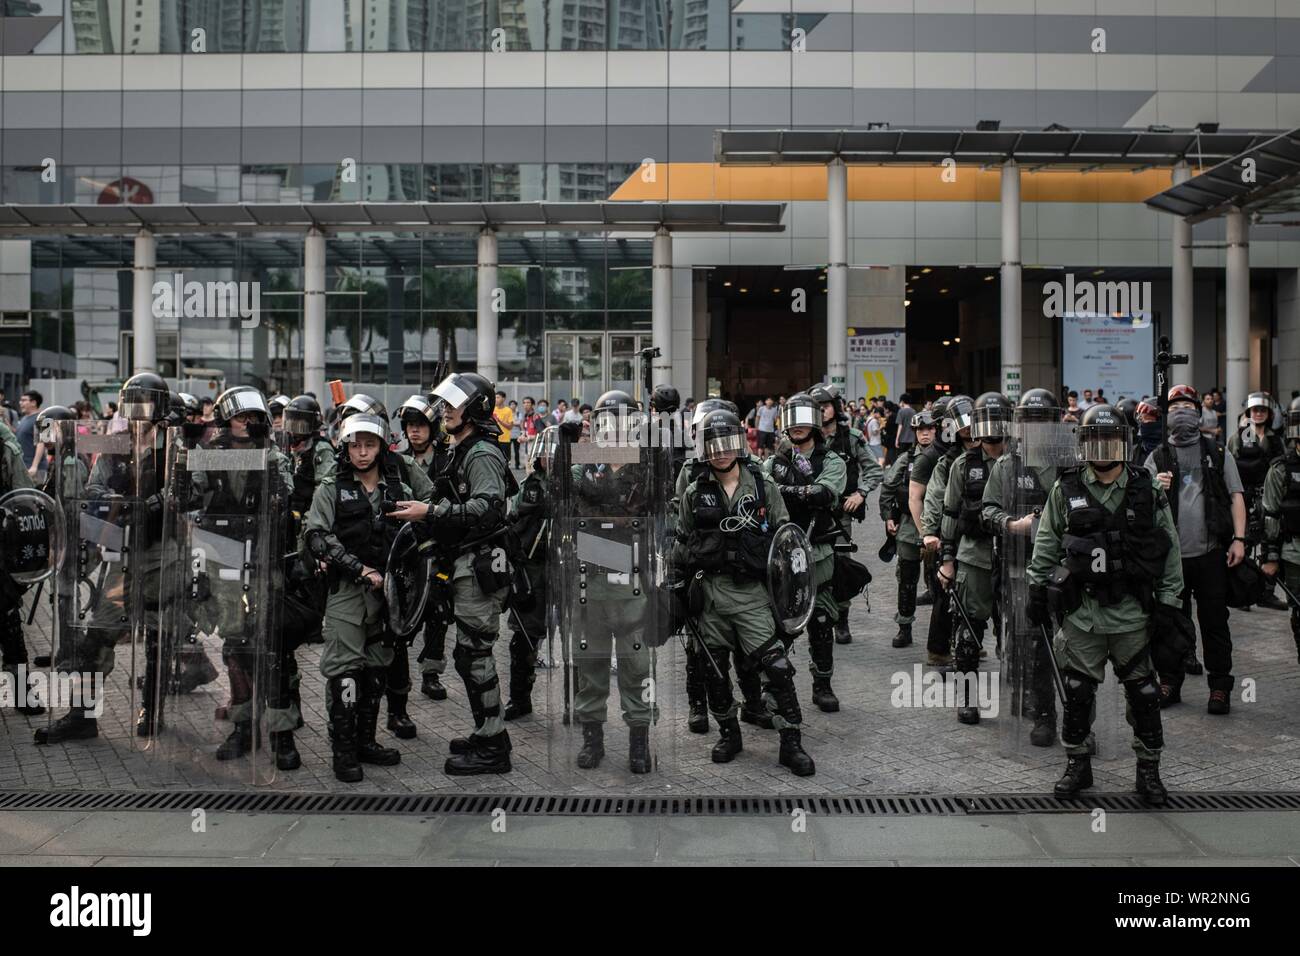 A group of riot police occupy a square in Tung Chung during the protests.After 14 weeks of protests, demonstrations have continued across Hong Kong despite the withdrawal by Chief Executive, Carrie Lam of a controversial extradition bill. Protests keep taking the streets as demonstrators demands the city's government to attend to their demands, including an independent inquiry into police brutality, the retraction of the word 'riot' to describe the rallies, and the right for Hong Kong people to vote for their own leaders. Stock Photo